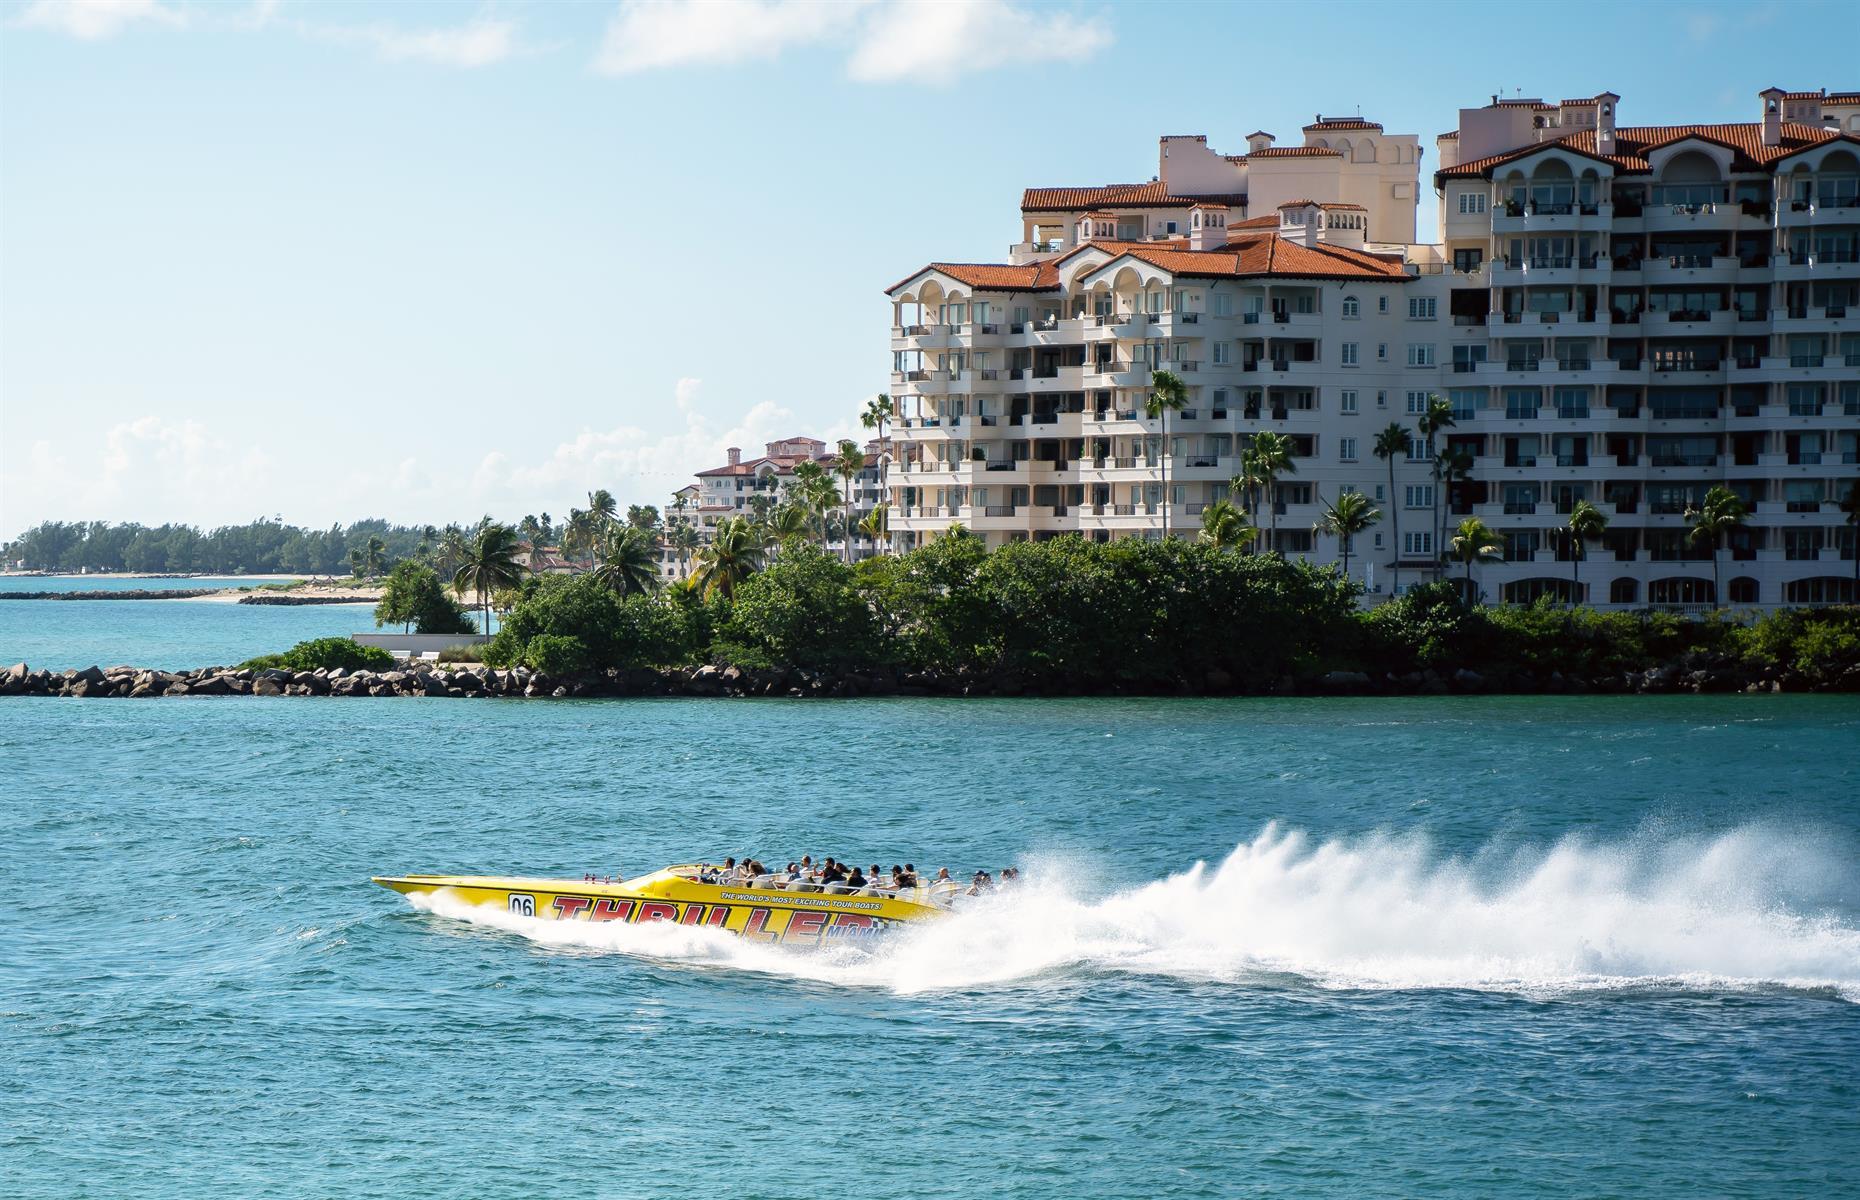 <p>Want to pick up the pace after a relaxing morning by the pool? Few places balance easy living with adrenaline quite like Miami – and if you’re looking for an experience that’s a little more Miami Vice, the <a href="https://www.thrillermiami.com/">Thriller speedboat tour</a> should go to the top of your itinerary. Departing from Bayside Marketplace, these 45-minute tours will take you to see celebrity super-homes on Star Island (watch out for Will Smith’s pad), the ever-changing skyline of downtown Miami and more. Unlike other boat tours, Thriller will take you right out into the Atlantic Ocean and covers three times the Miami area. Also unlike other boat tours, it reaches speeds of up to 40 miles per hour. Hold onto your hats...</p>